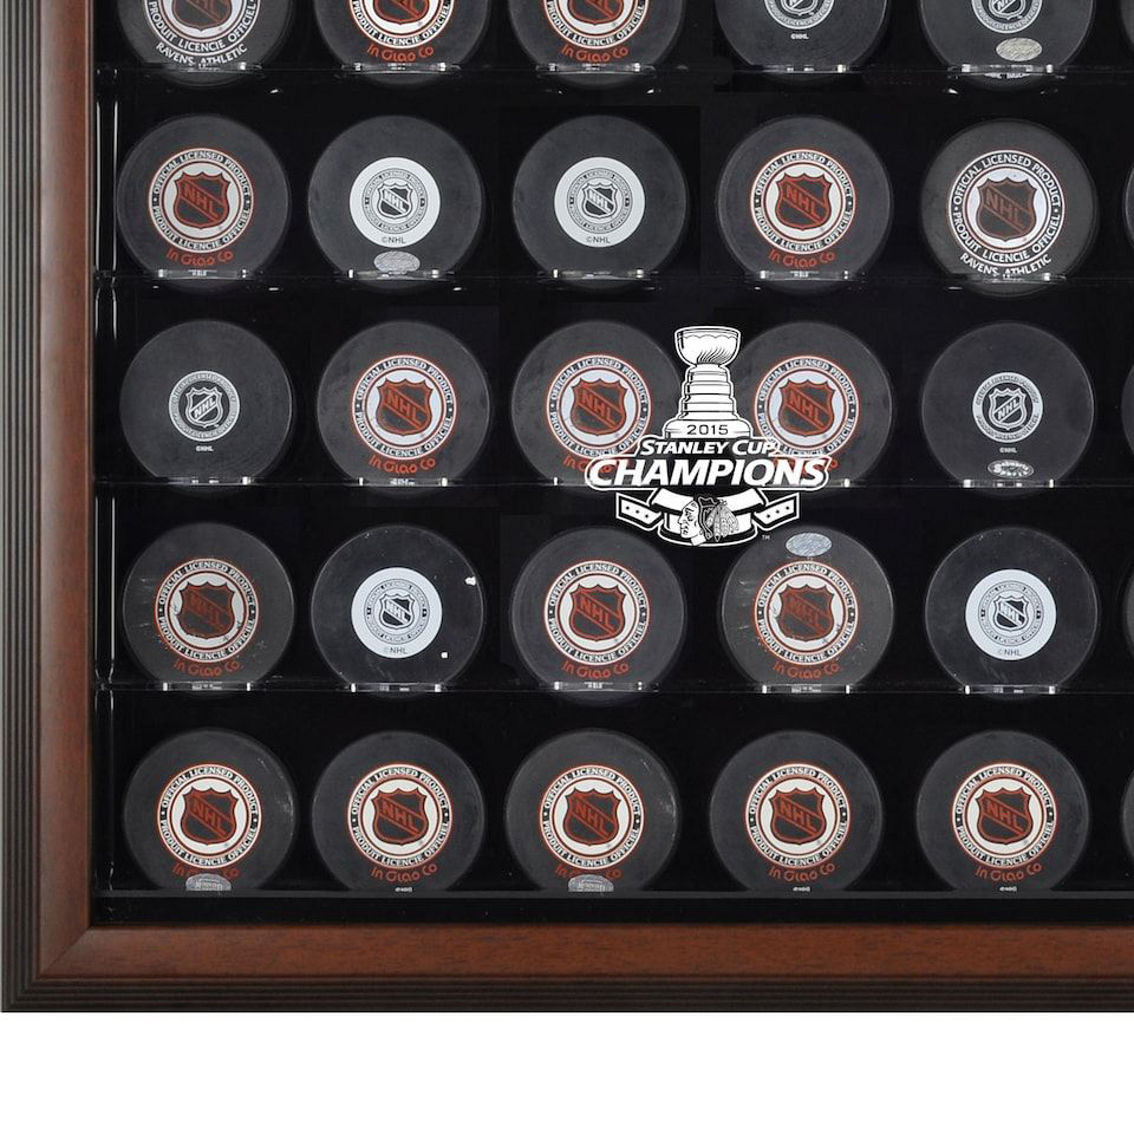 Fanatics Authentic Chicago Blackhawks 2015 Stanley Cup s Brown Framed 30-Puck Logo Display Case - Image 1 of 2